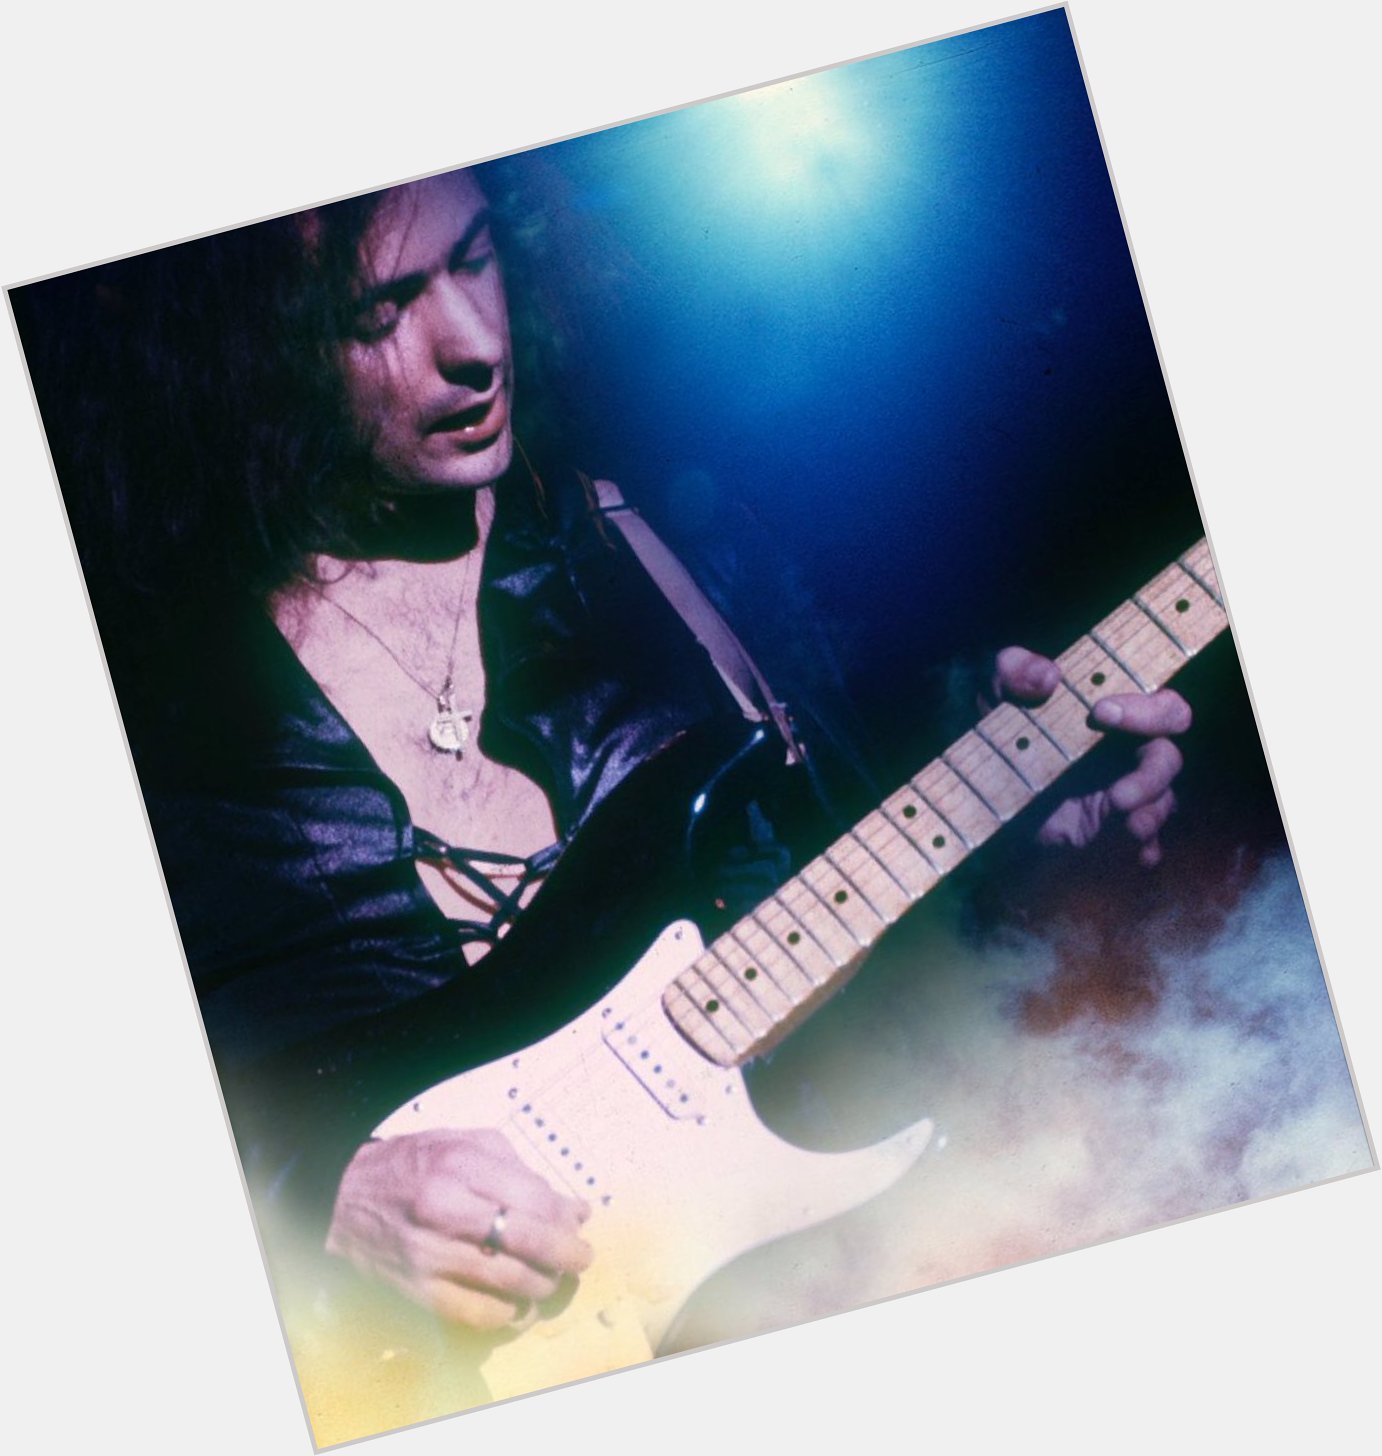 Happy 78th birthday to the legendary Ritchie Blackmore who was born this day in 1945. 